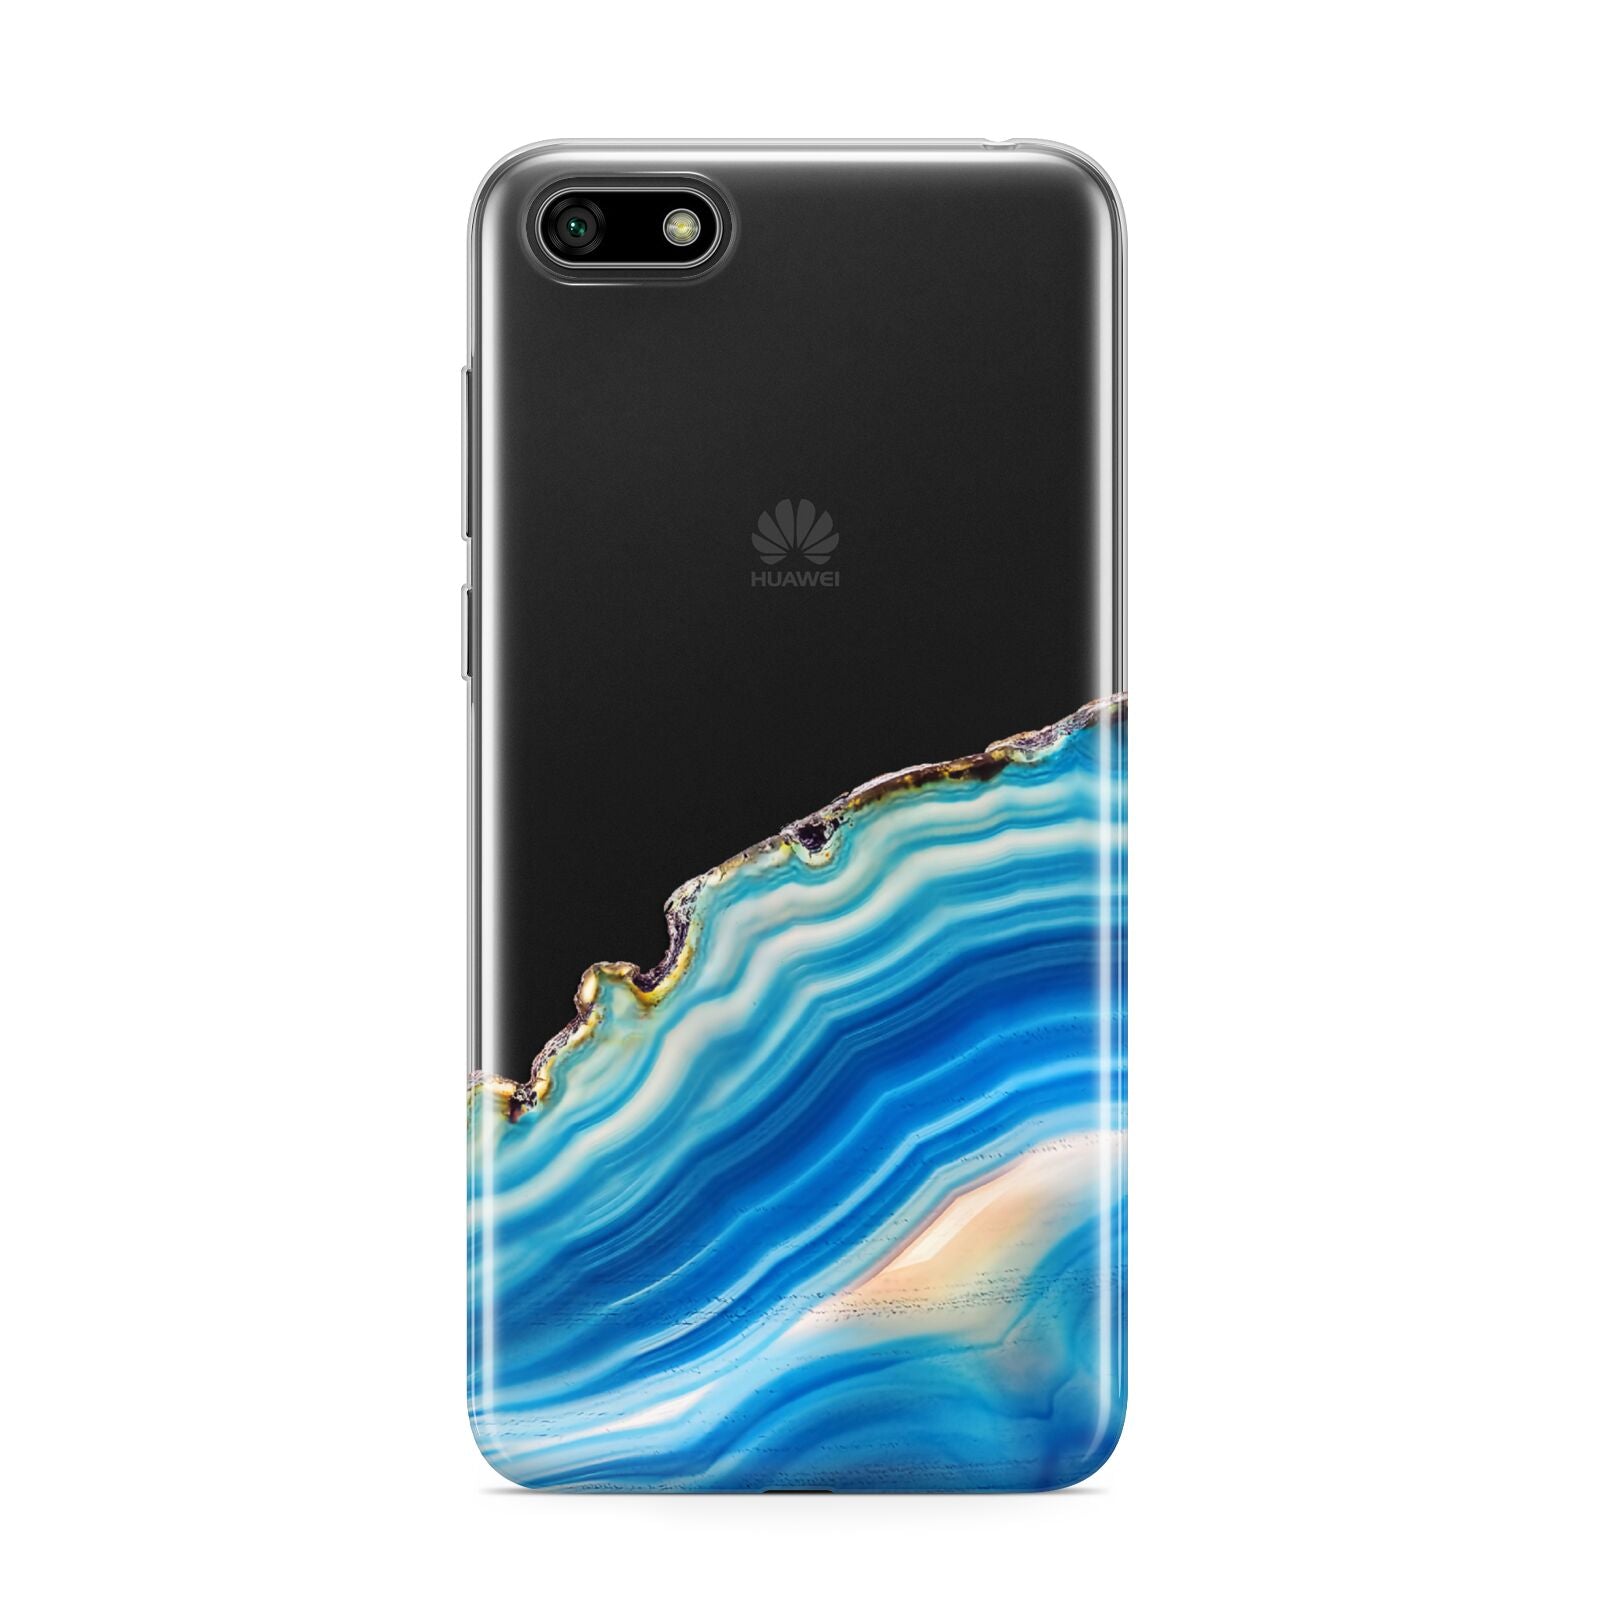 Agate Pale Blue and Bright Blue Huawei Y5 Prime 2018 Phone Case